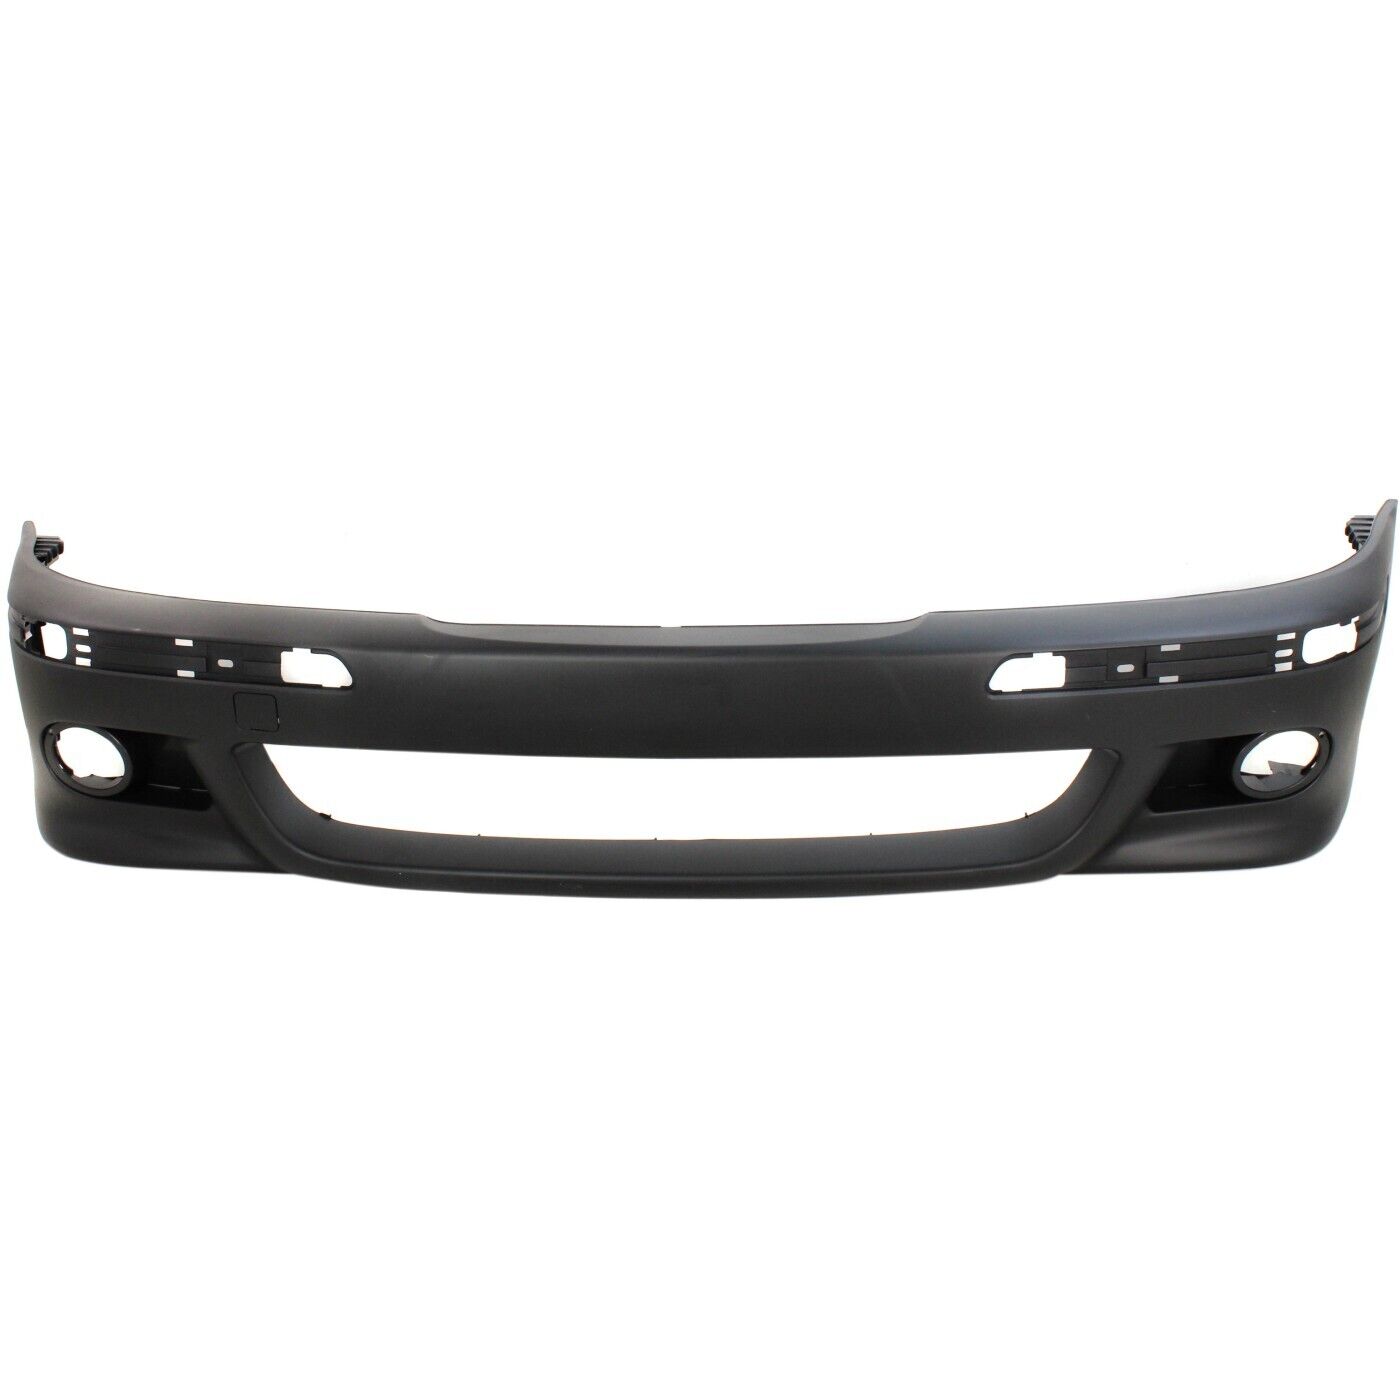 Front Bumper Cover For 2000-2003 BMW M5 w/ PDC Sensor Hole/Plastic Grille Primed